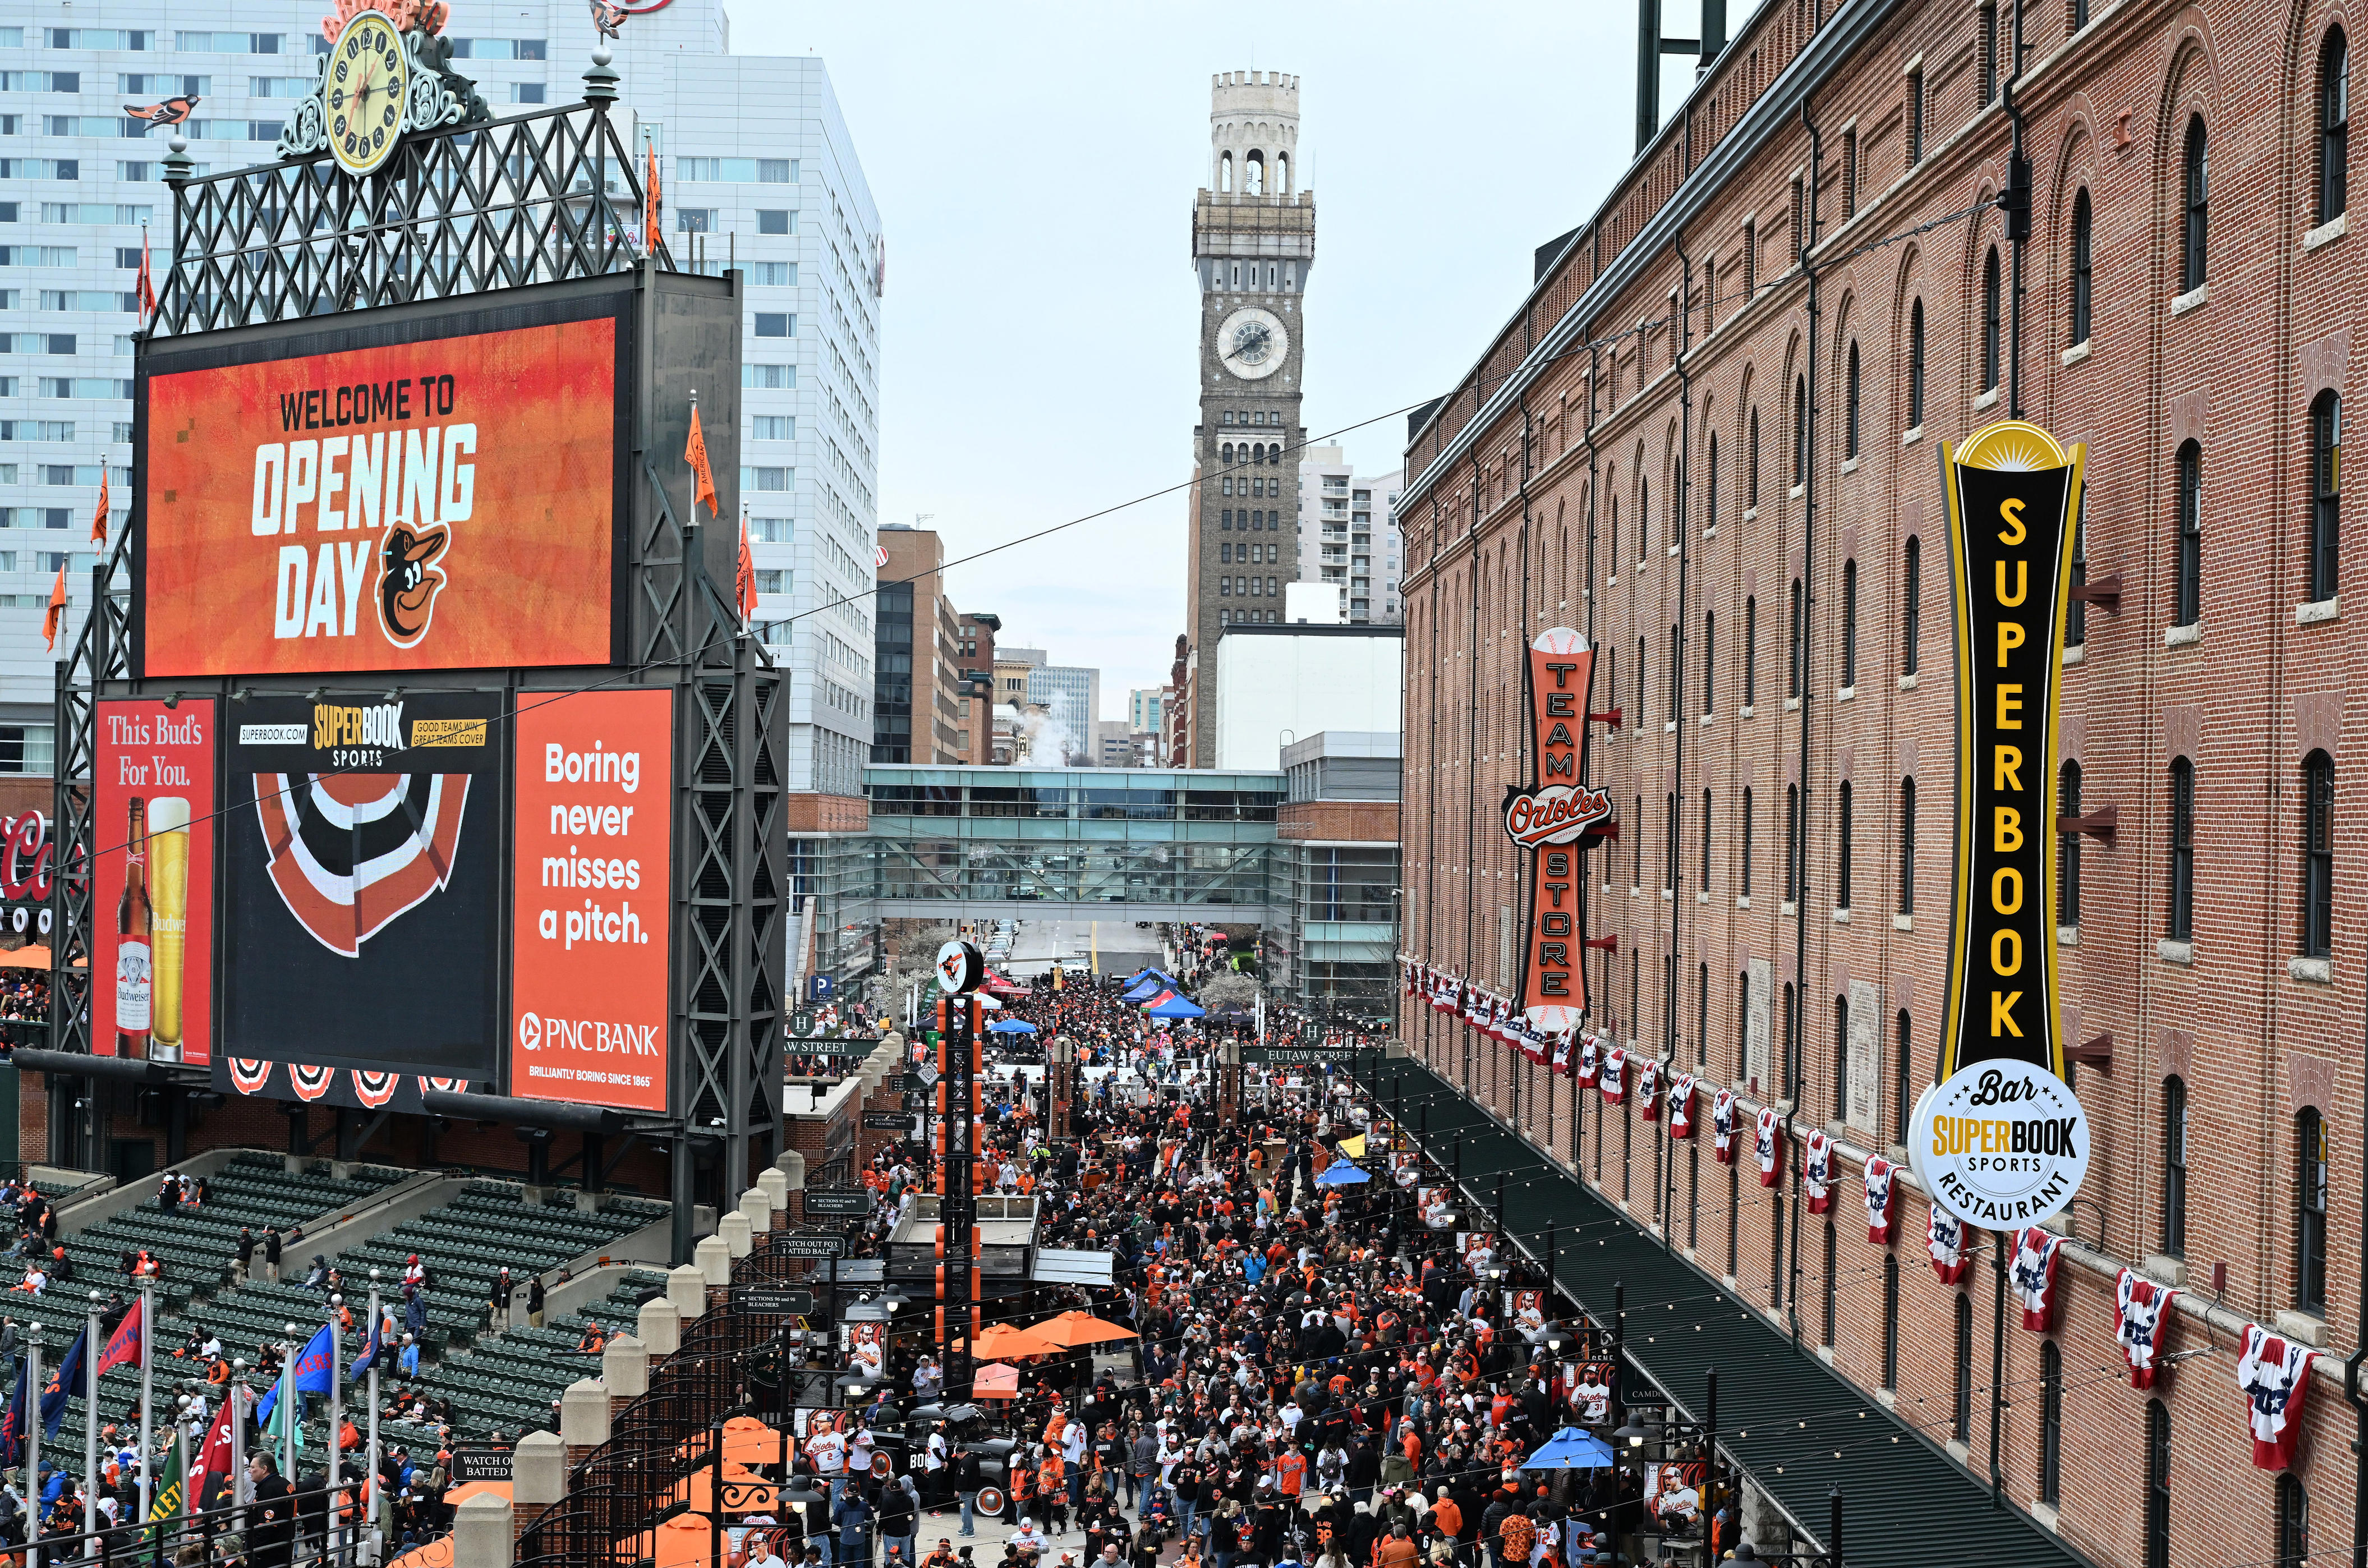 opening day like no other: orioles welcome new owner, chase world series as tragedy envelops baltimore